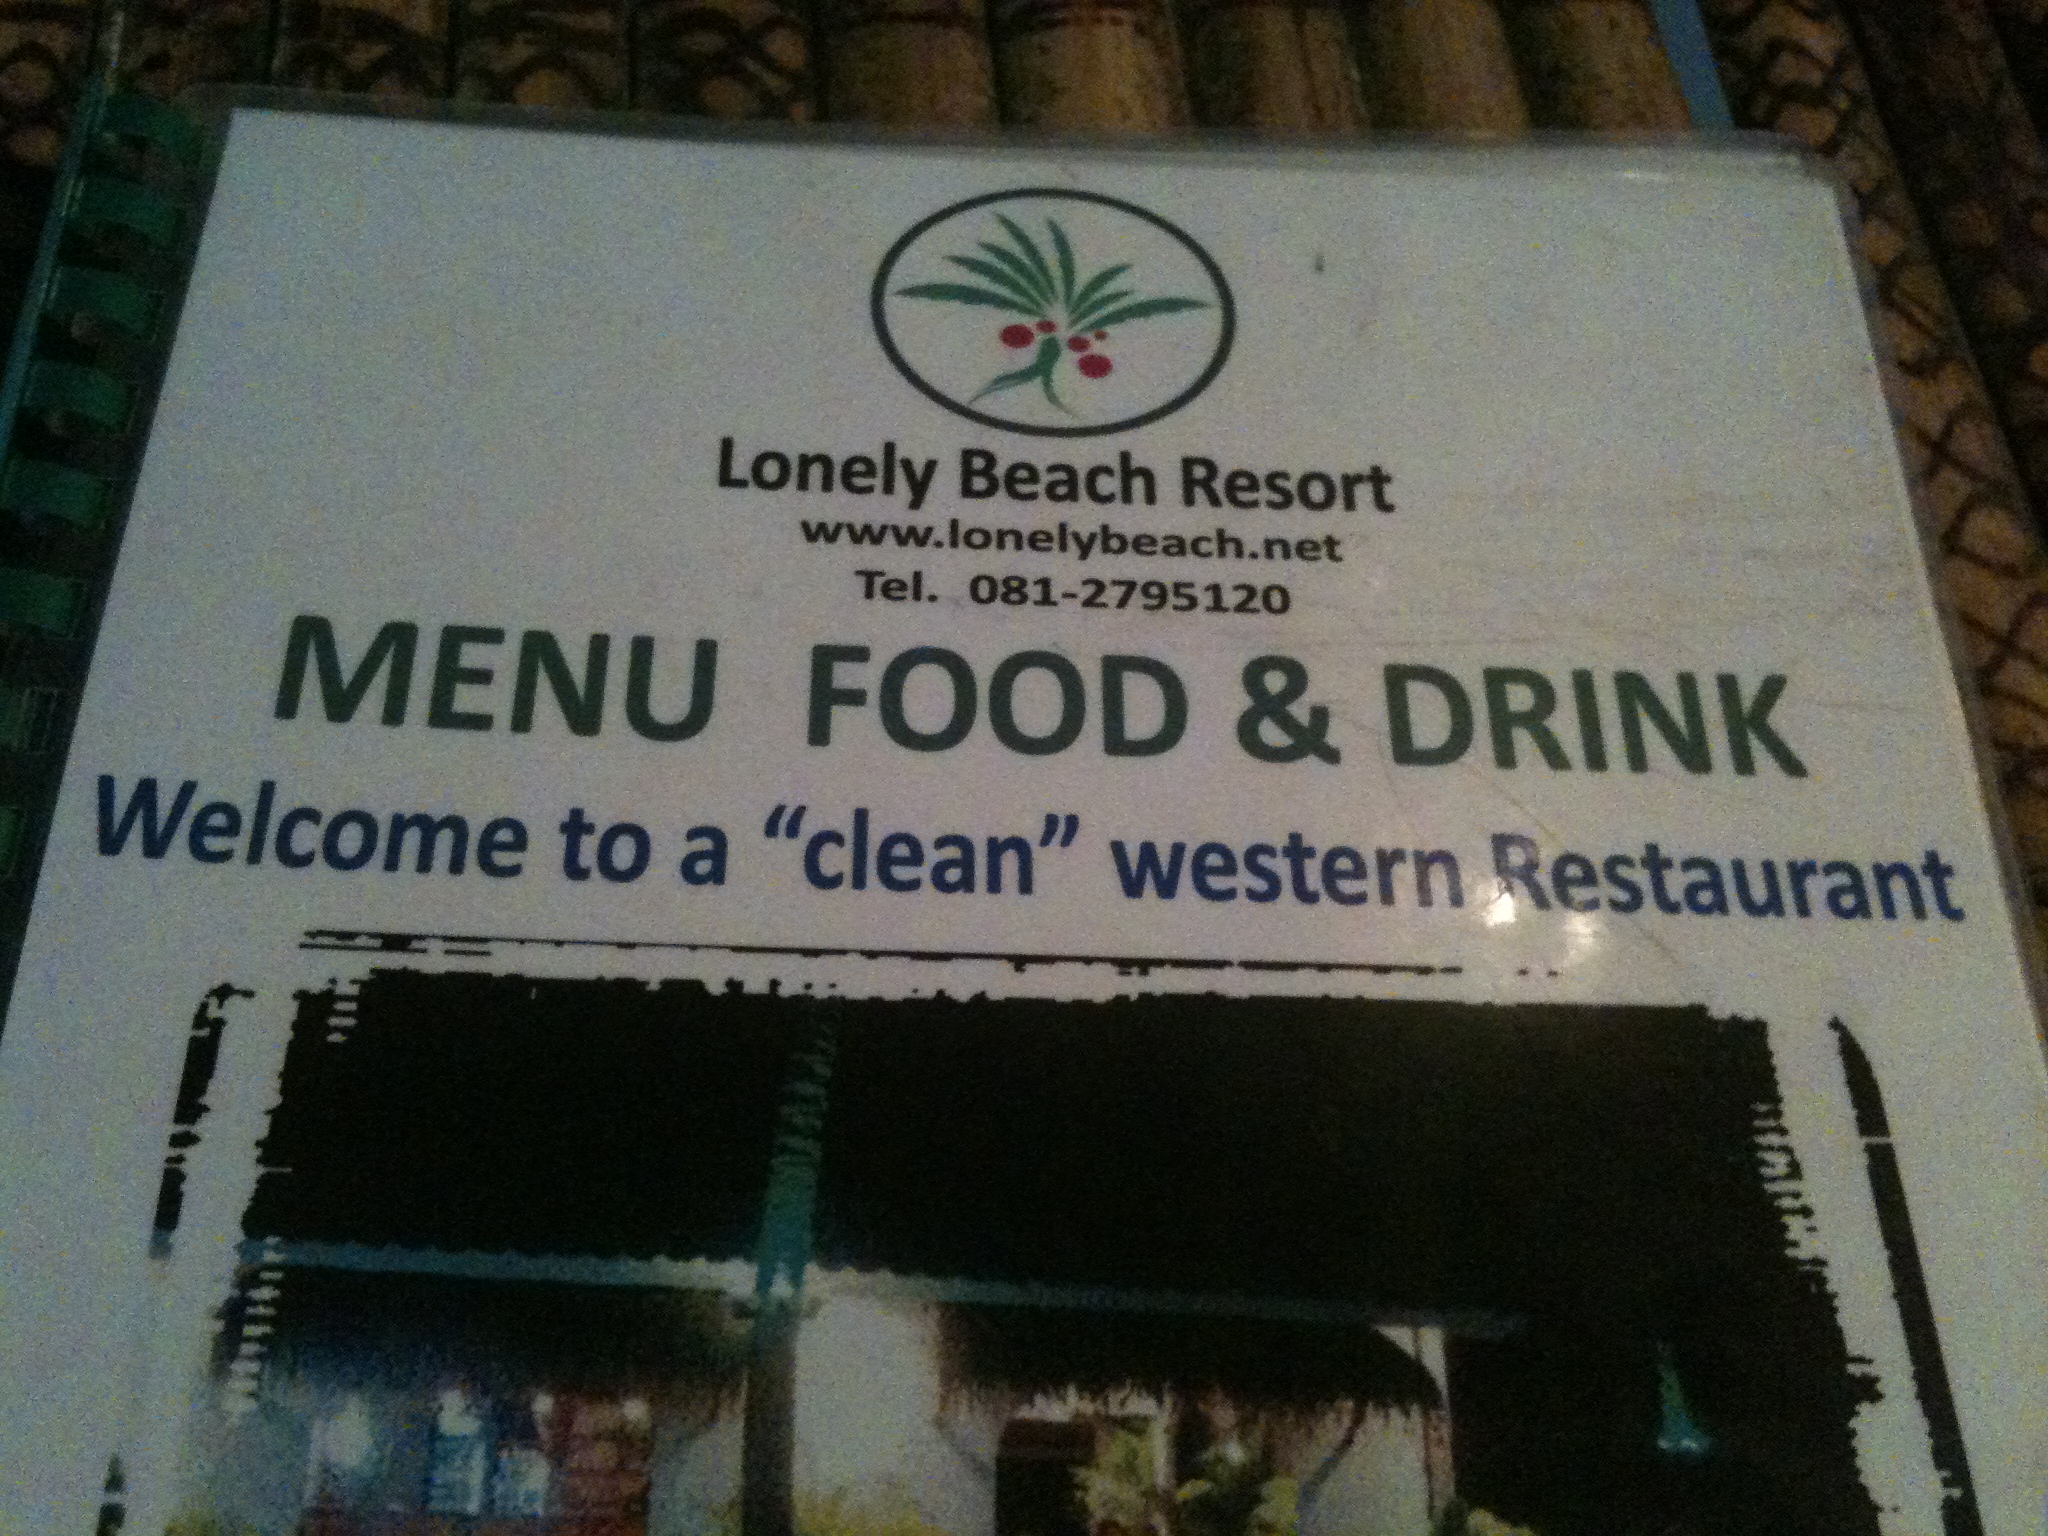 Quotation - Lonely Beach Resort Tel. 0812795120 Menu Food & Drink Welcome to a "clean" western Restaurant